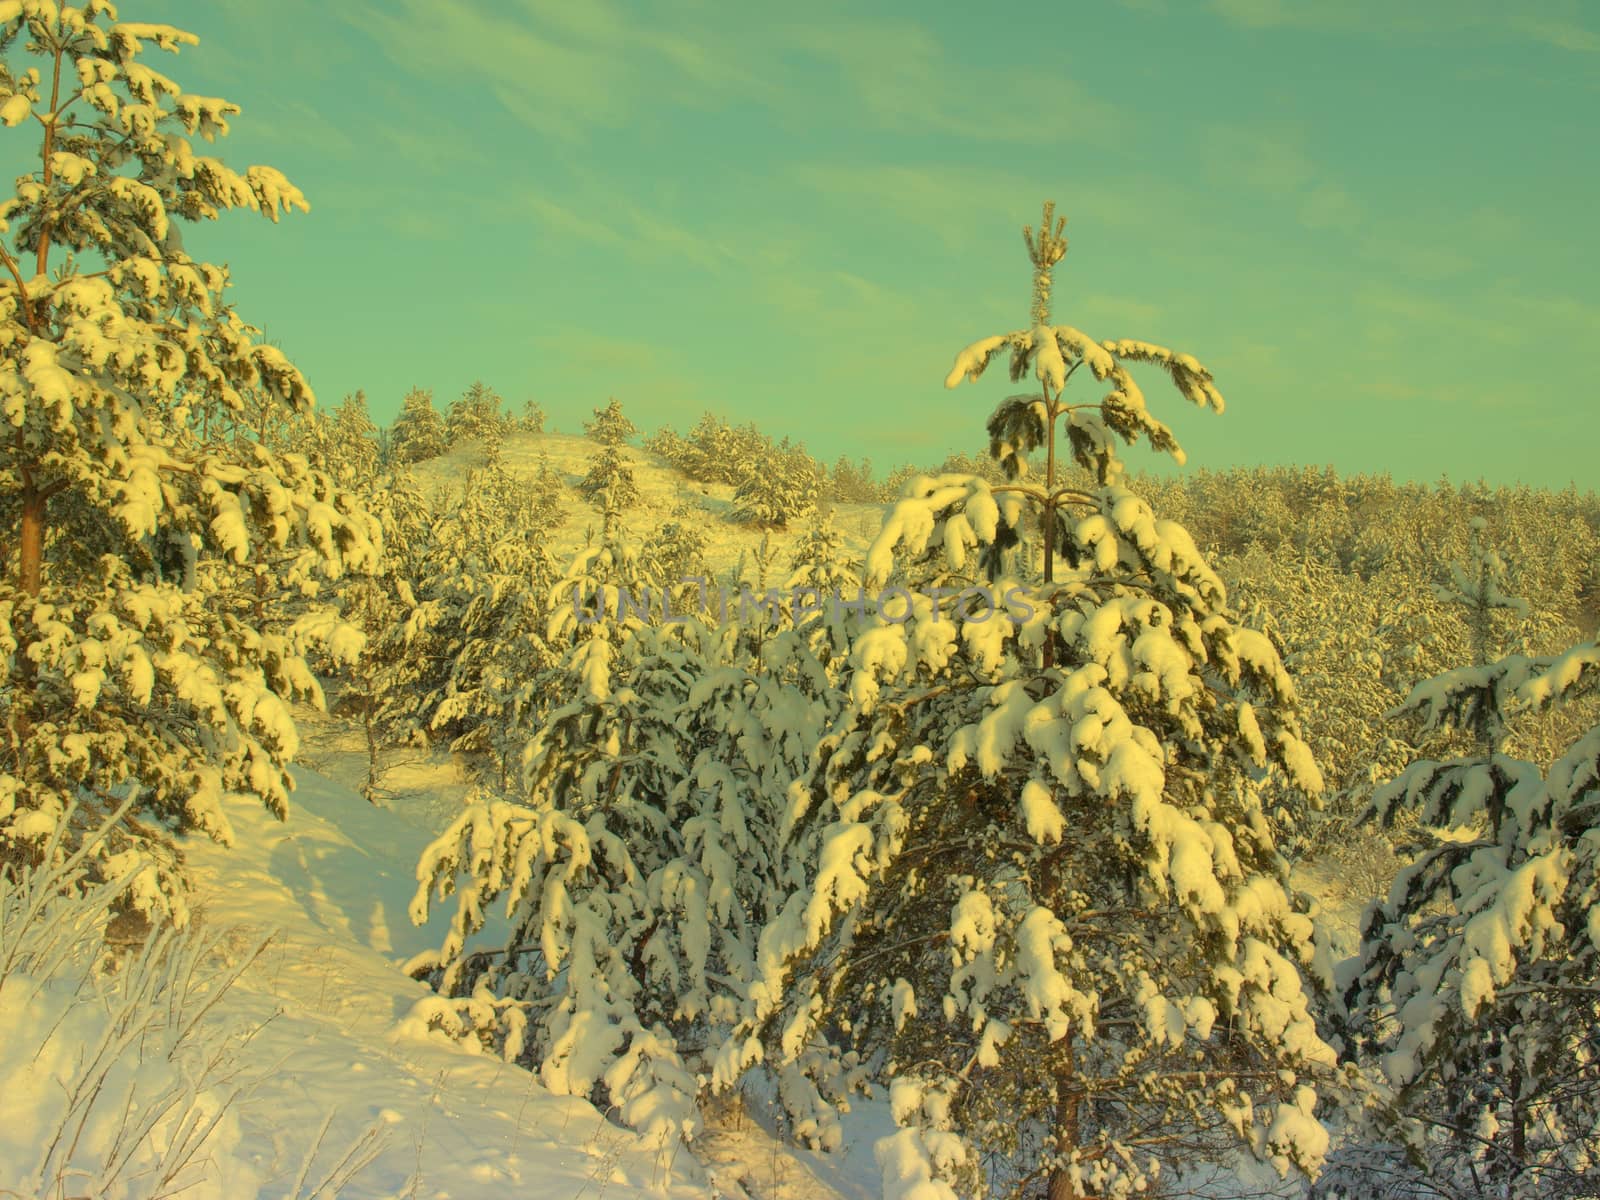 beautiful winter landscape with pines snow covered